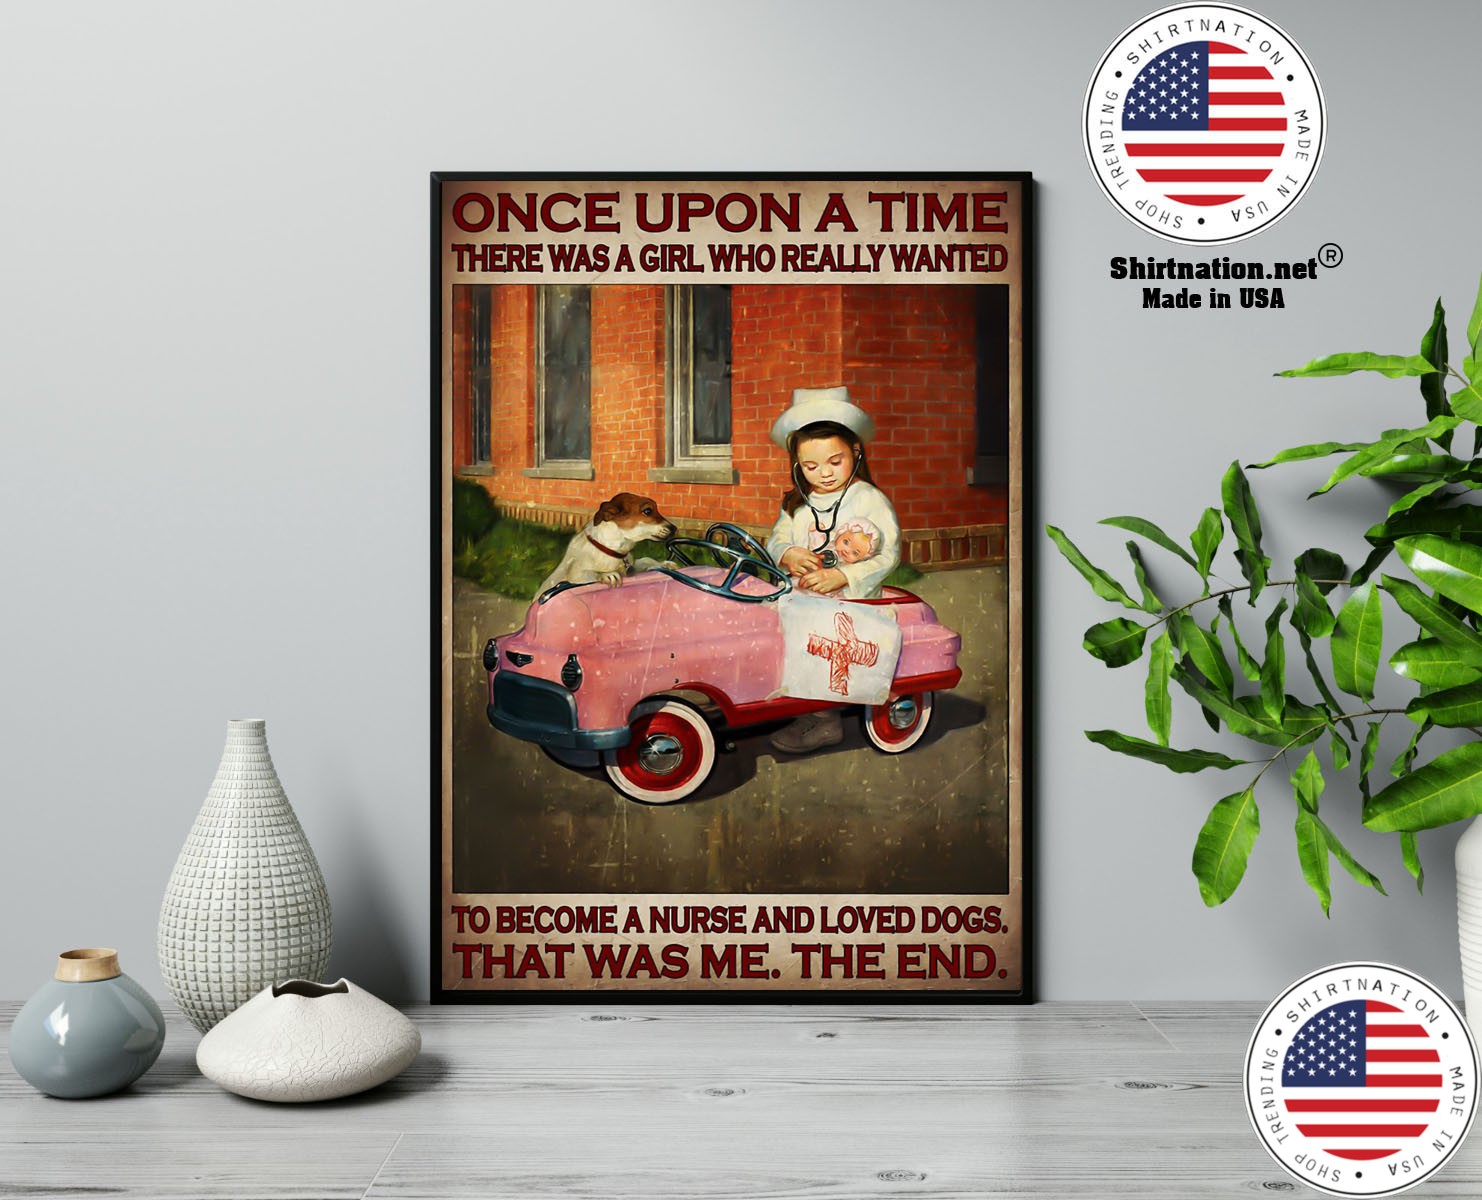 Once upon a time there was a girl who really wanted to become a nurse and loved dogs poster 13